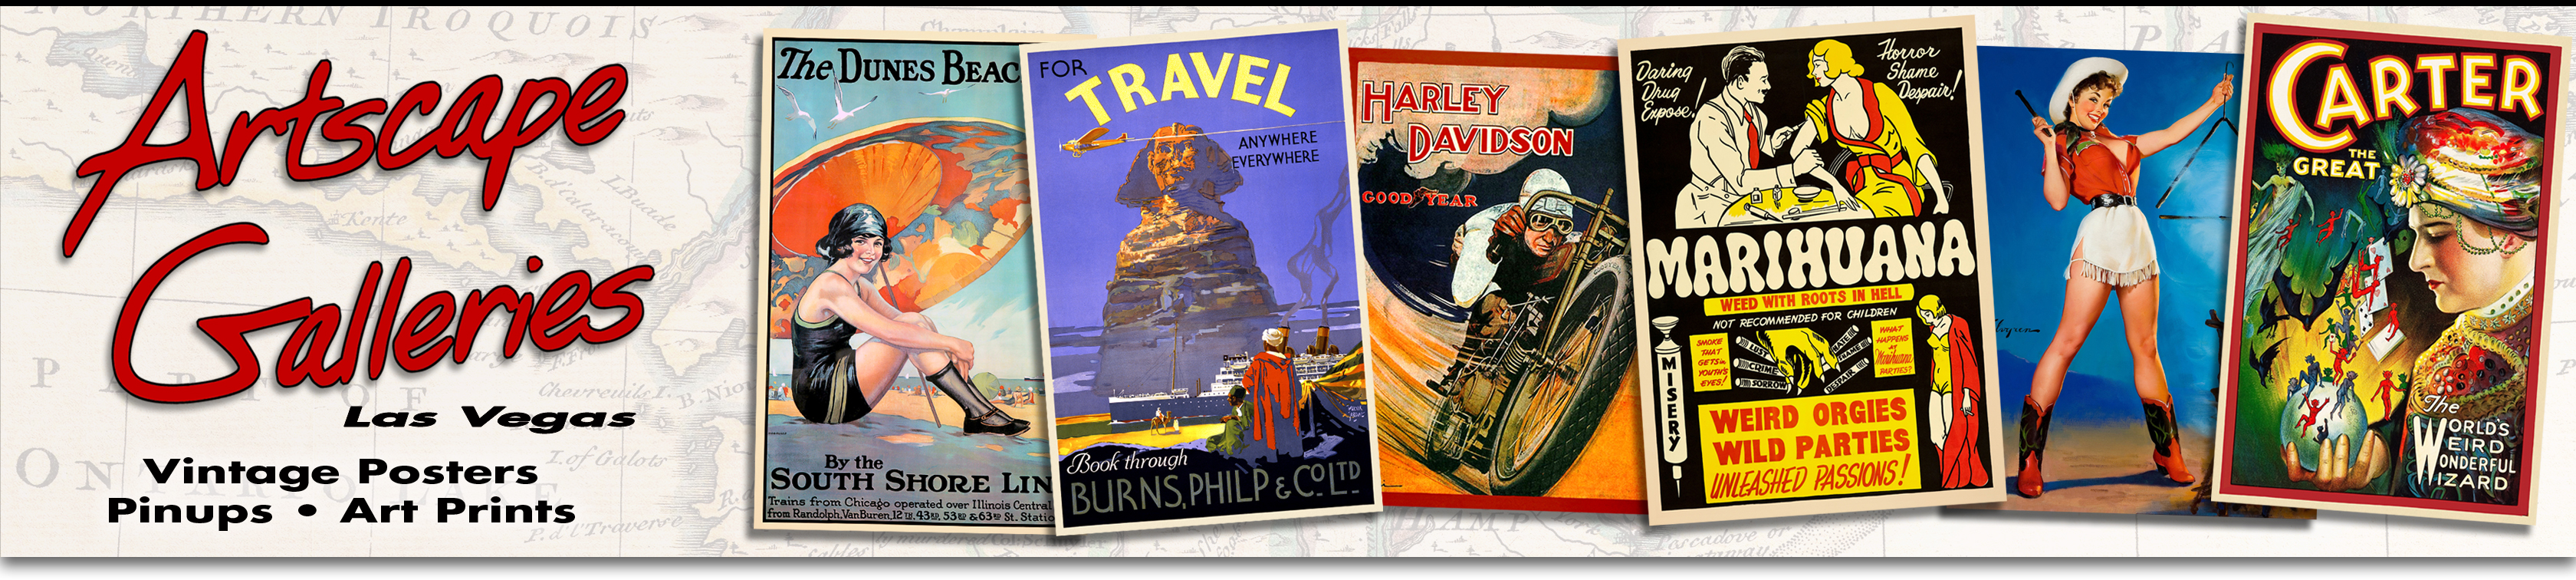 1930s For Travel /"Anywhere Everywhere/" Vintage Style Travel Poster 24x36